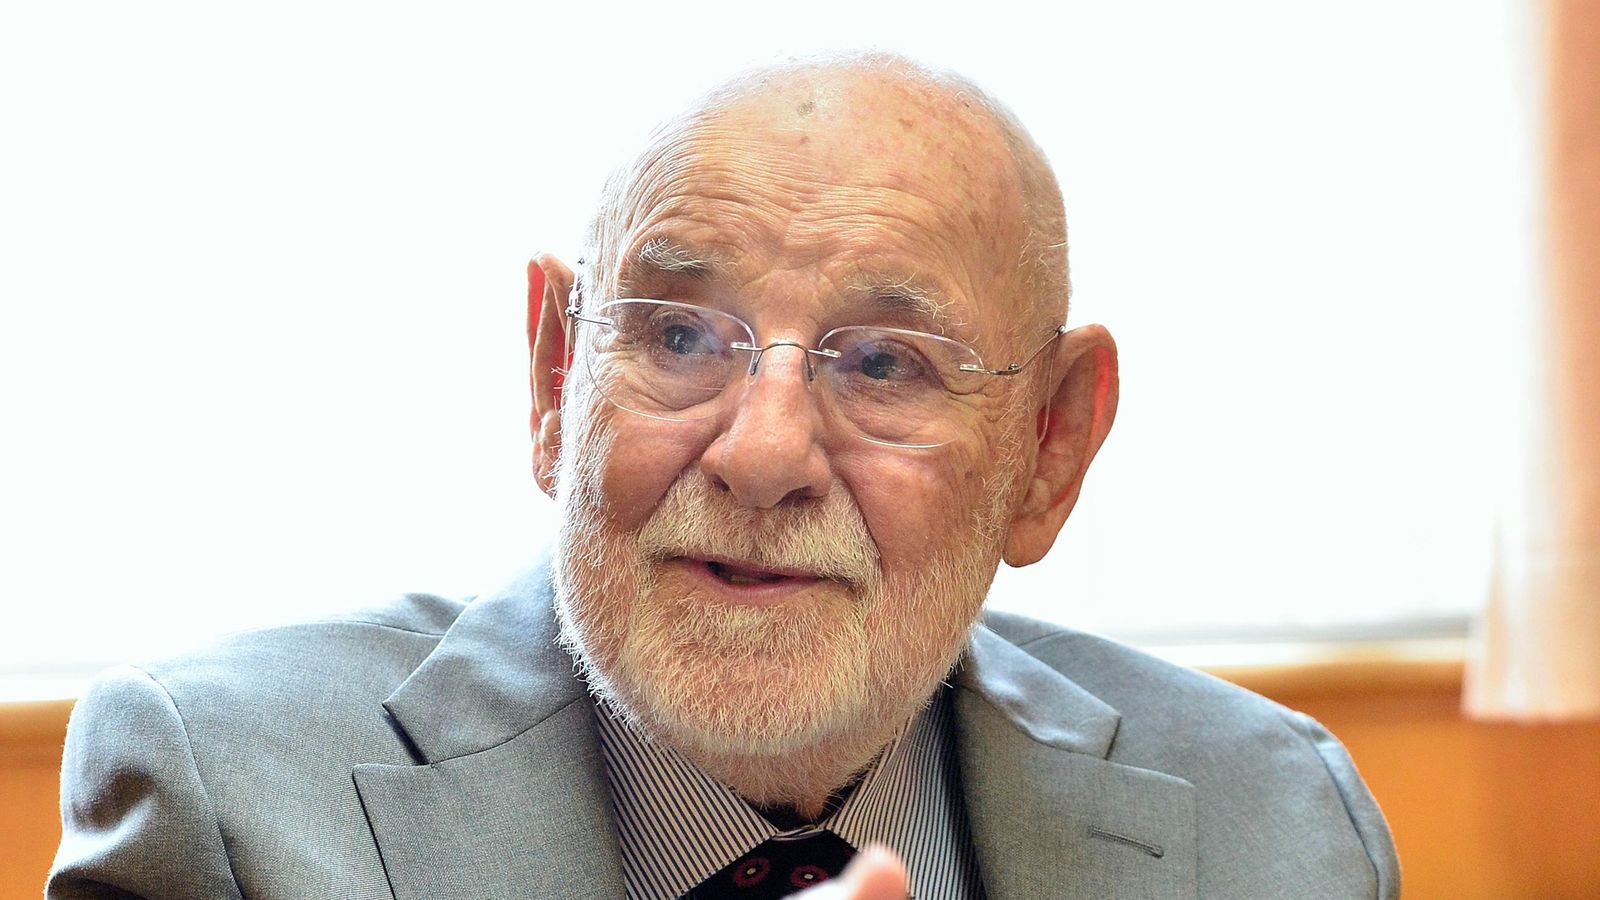 Eric Carle, author of multimillion-selling Very Hungry Caterpillar book, dies aged 91